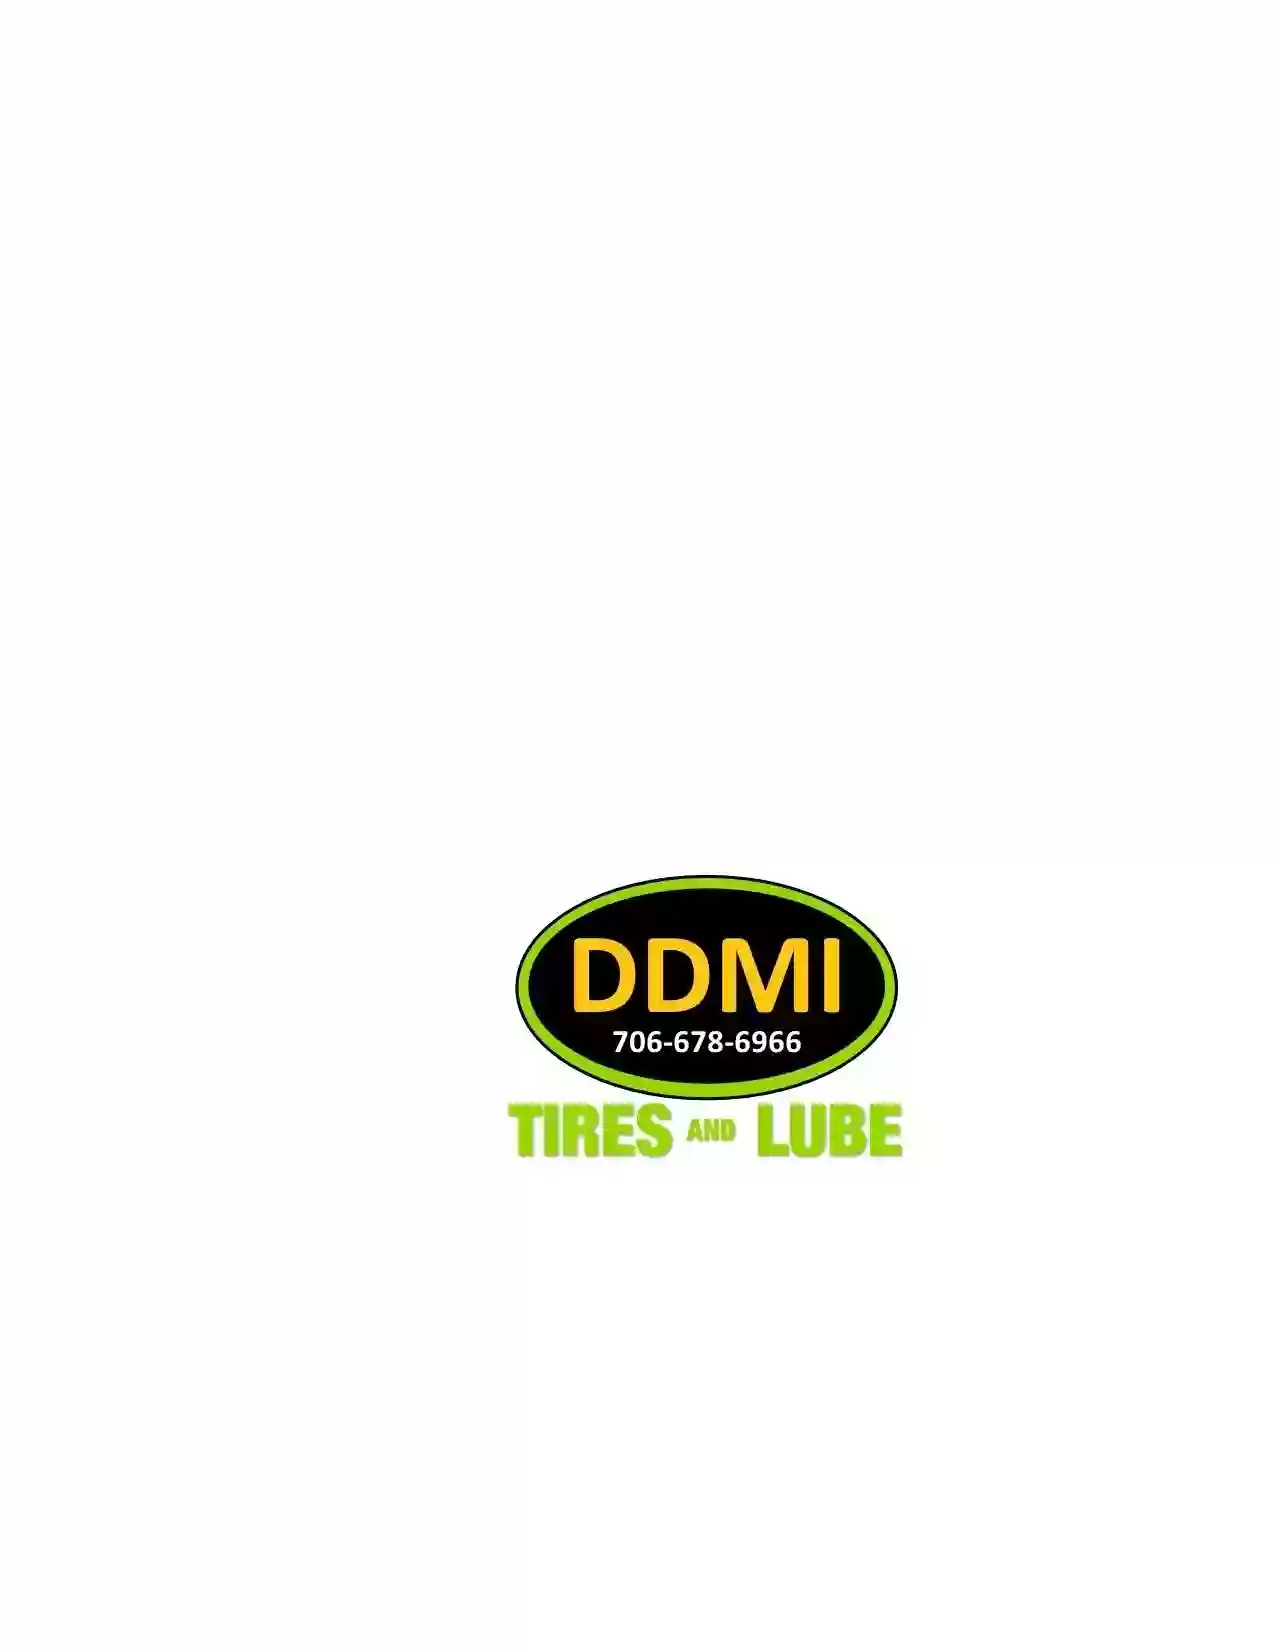 DDMI Tires and Lube